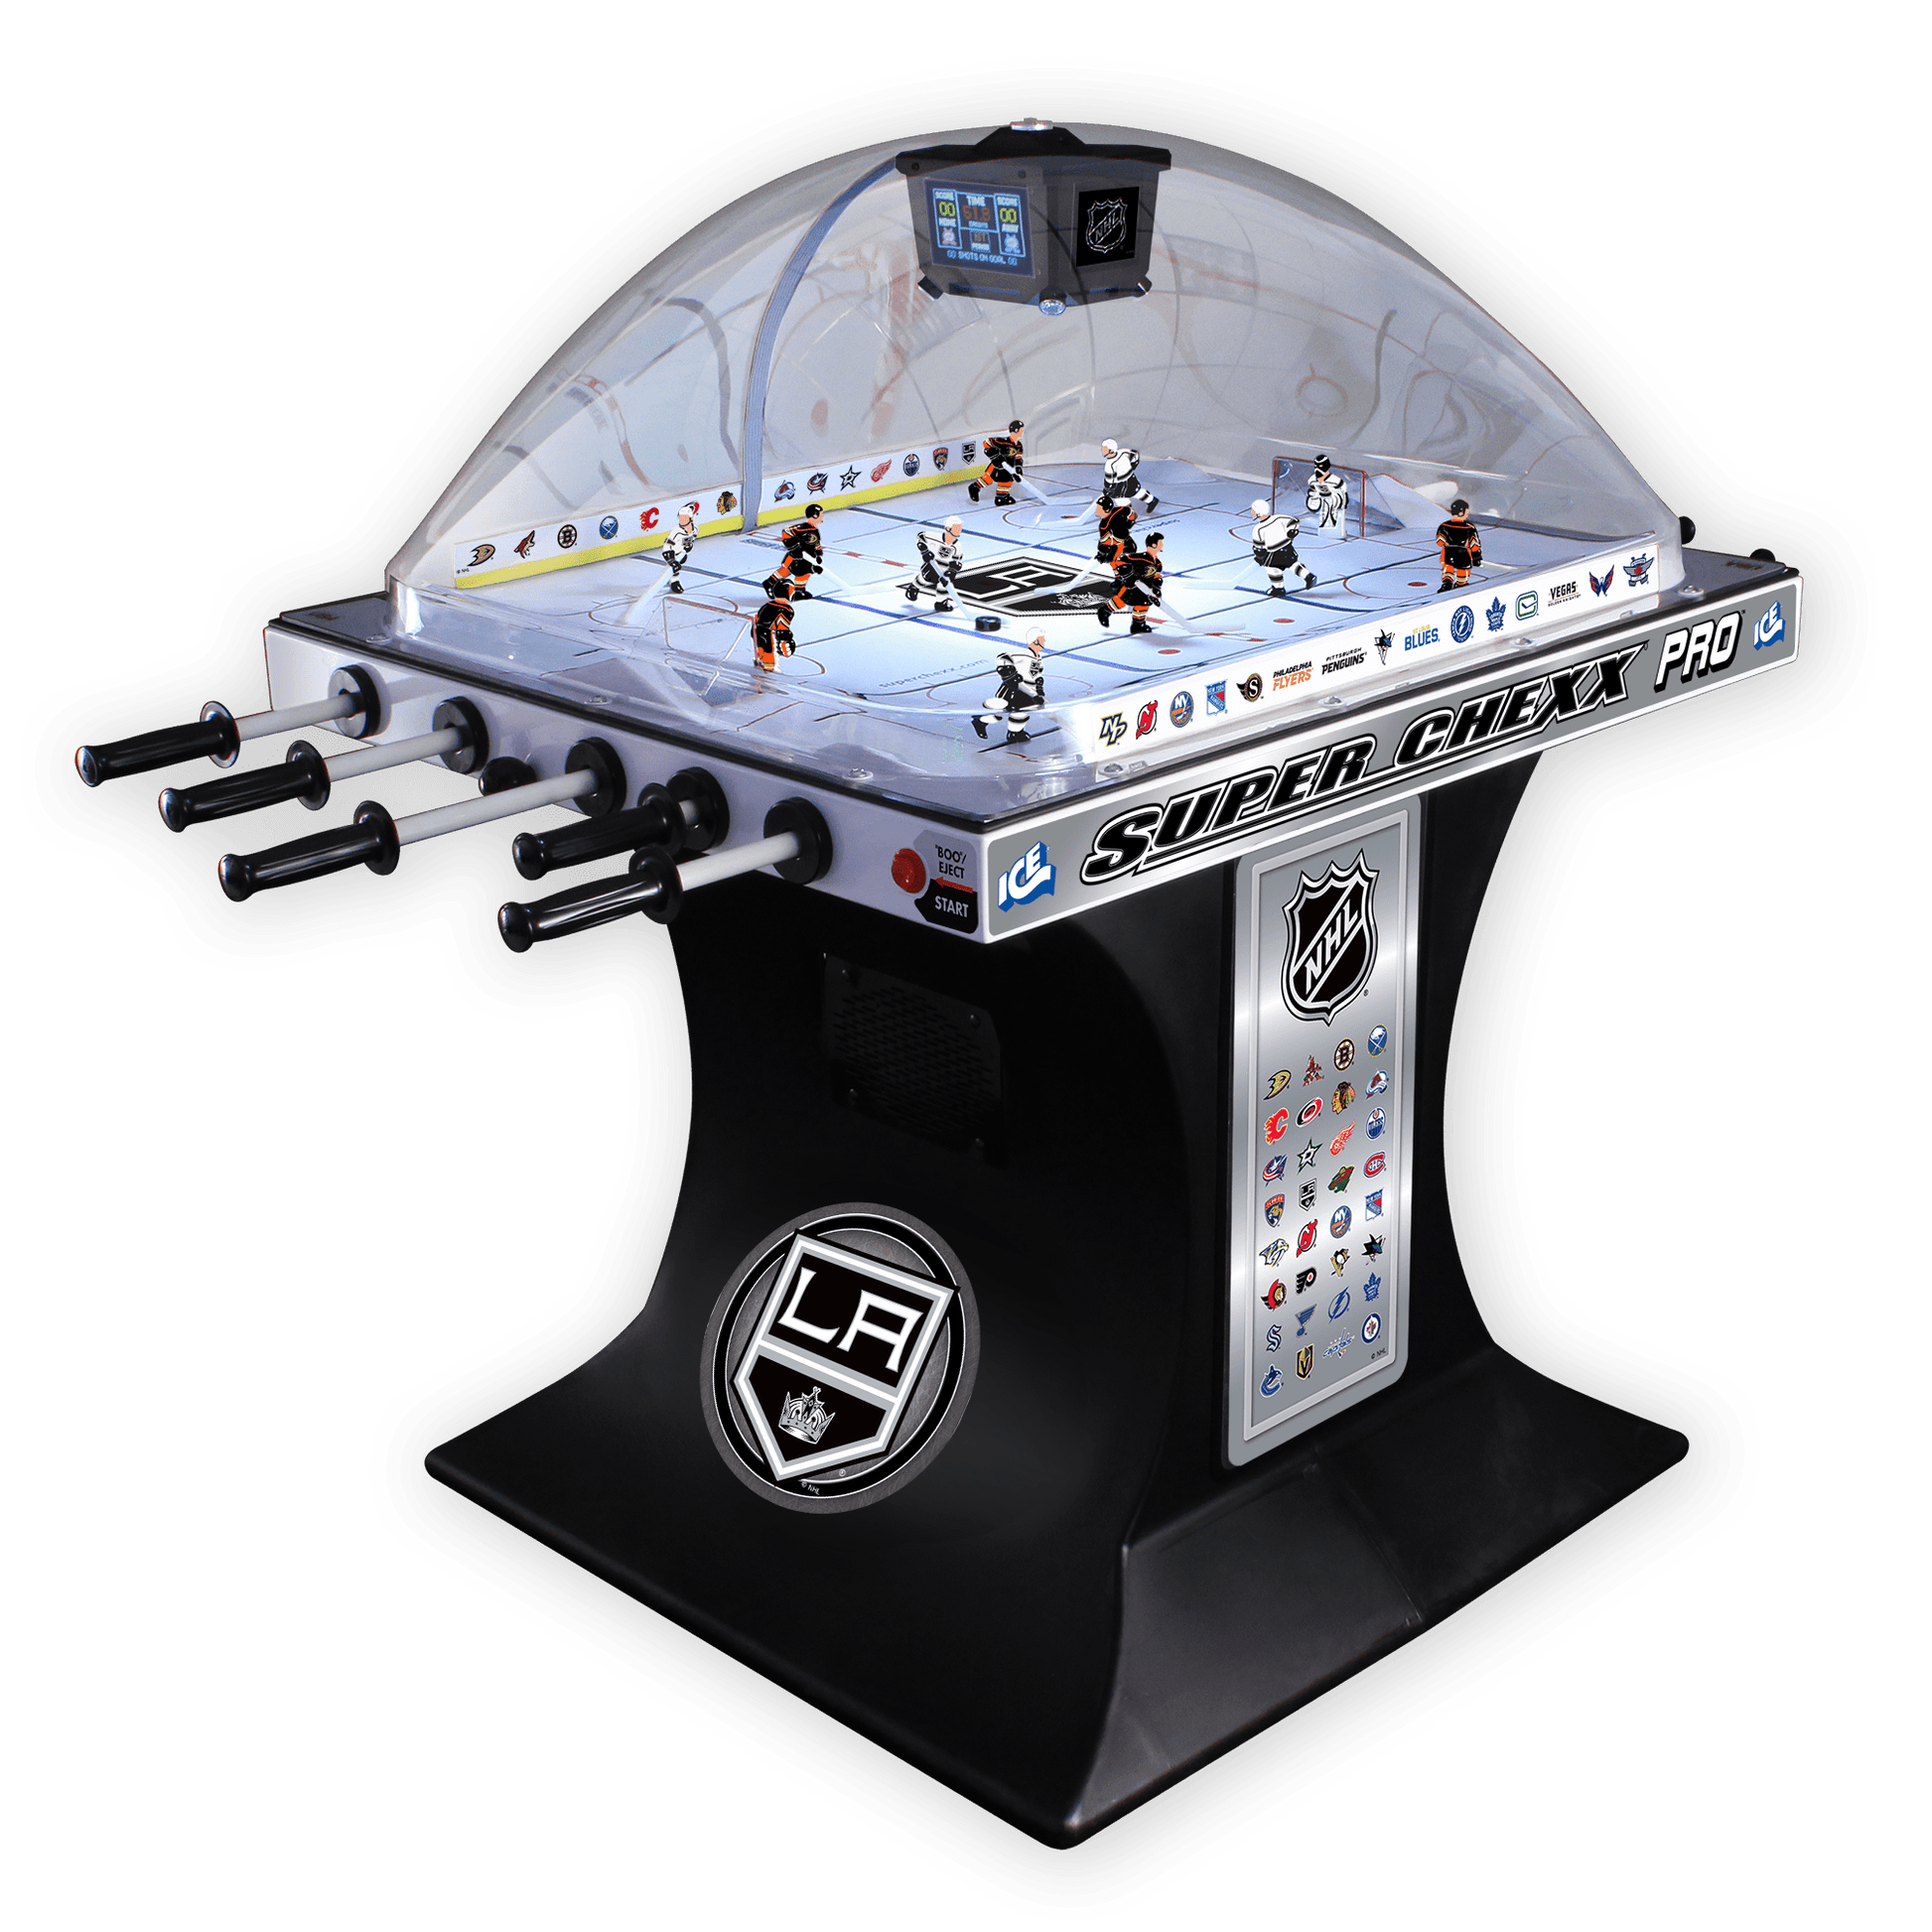 L.A. Kings NHL Super Chexx Pro Bubble Hockey Arcade Innovative Concepts in Entertainment   